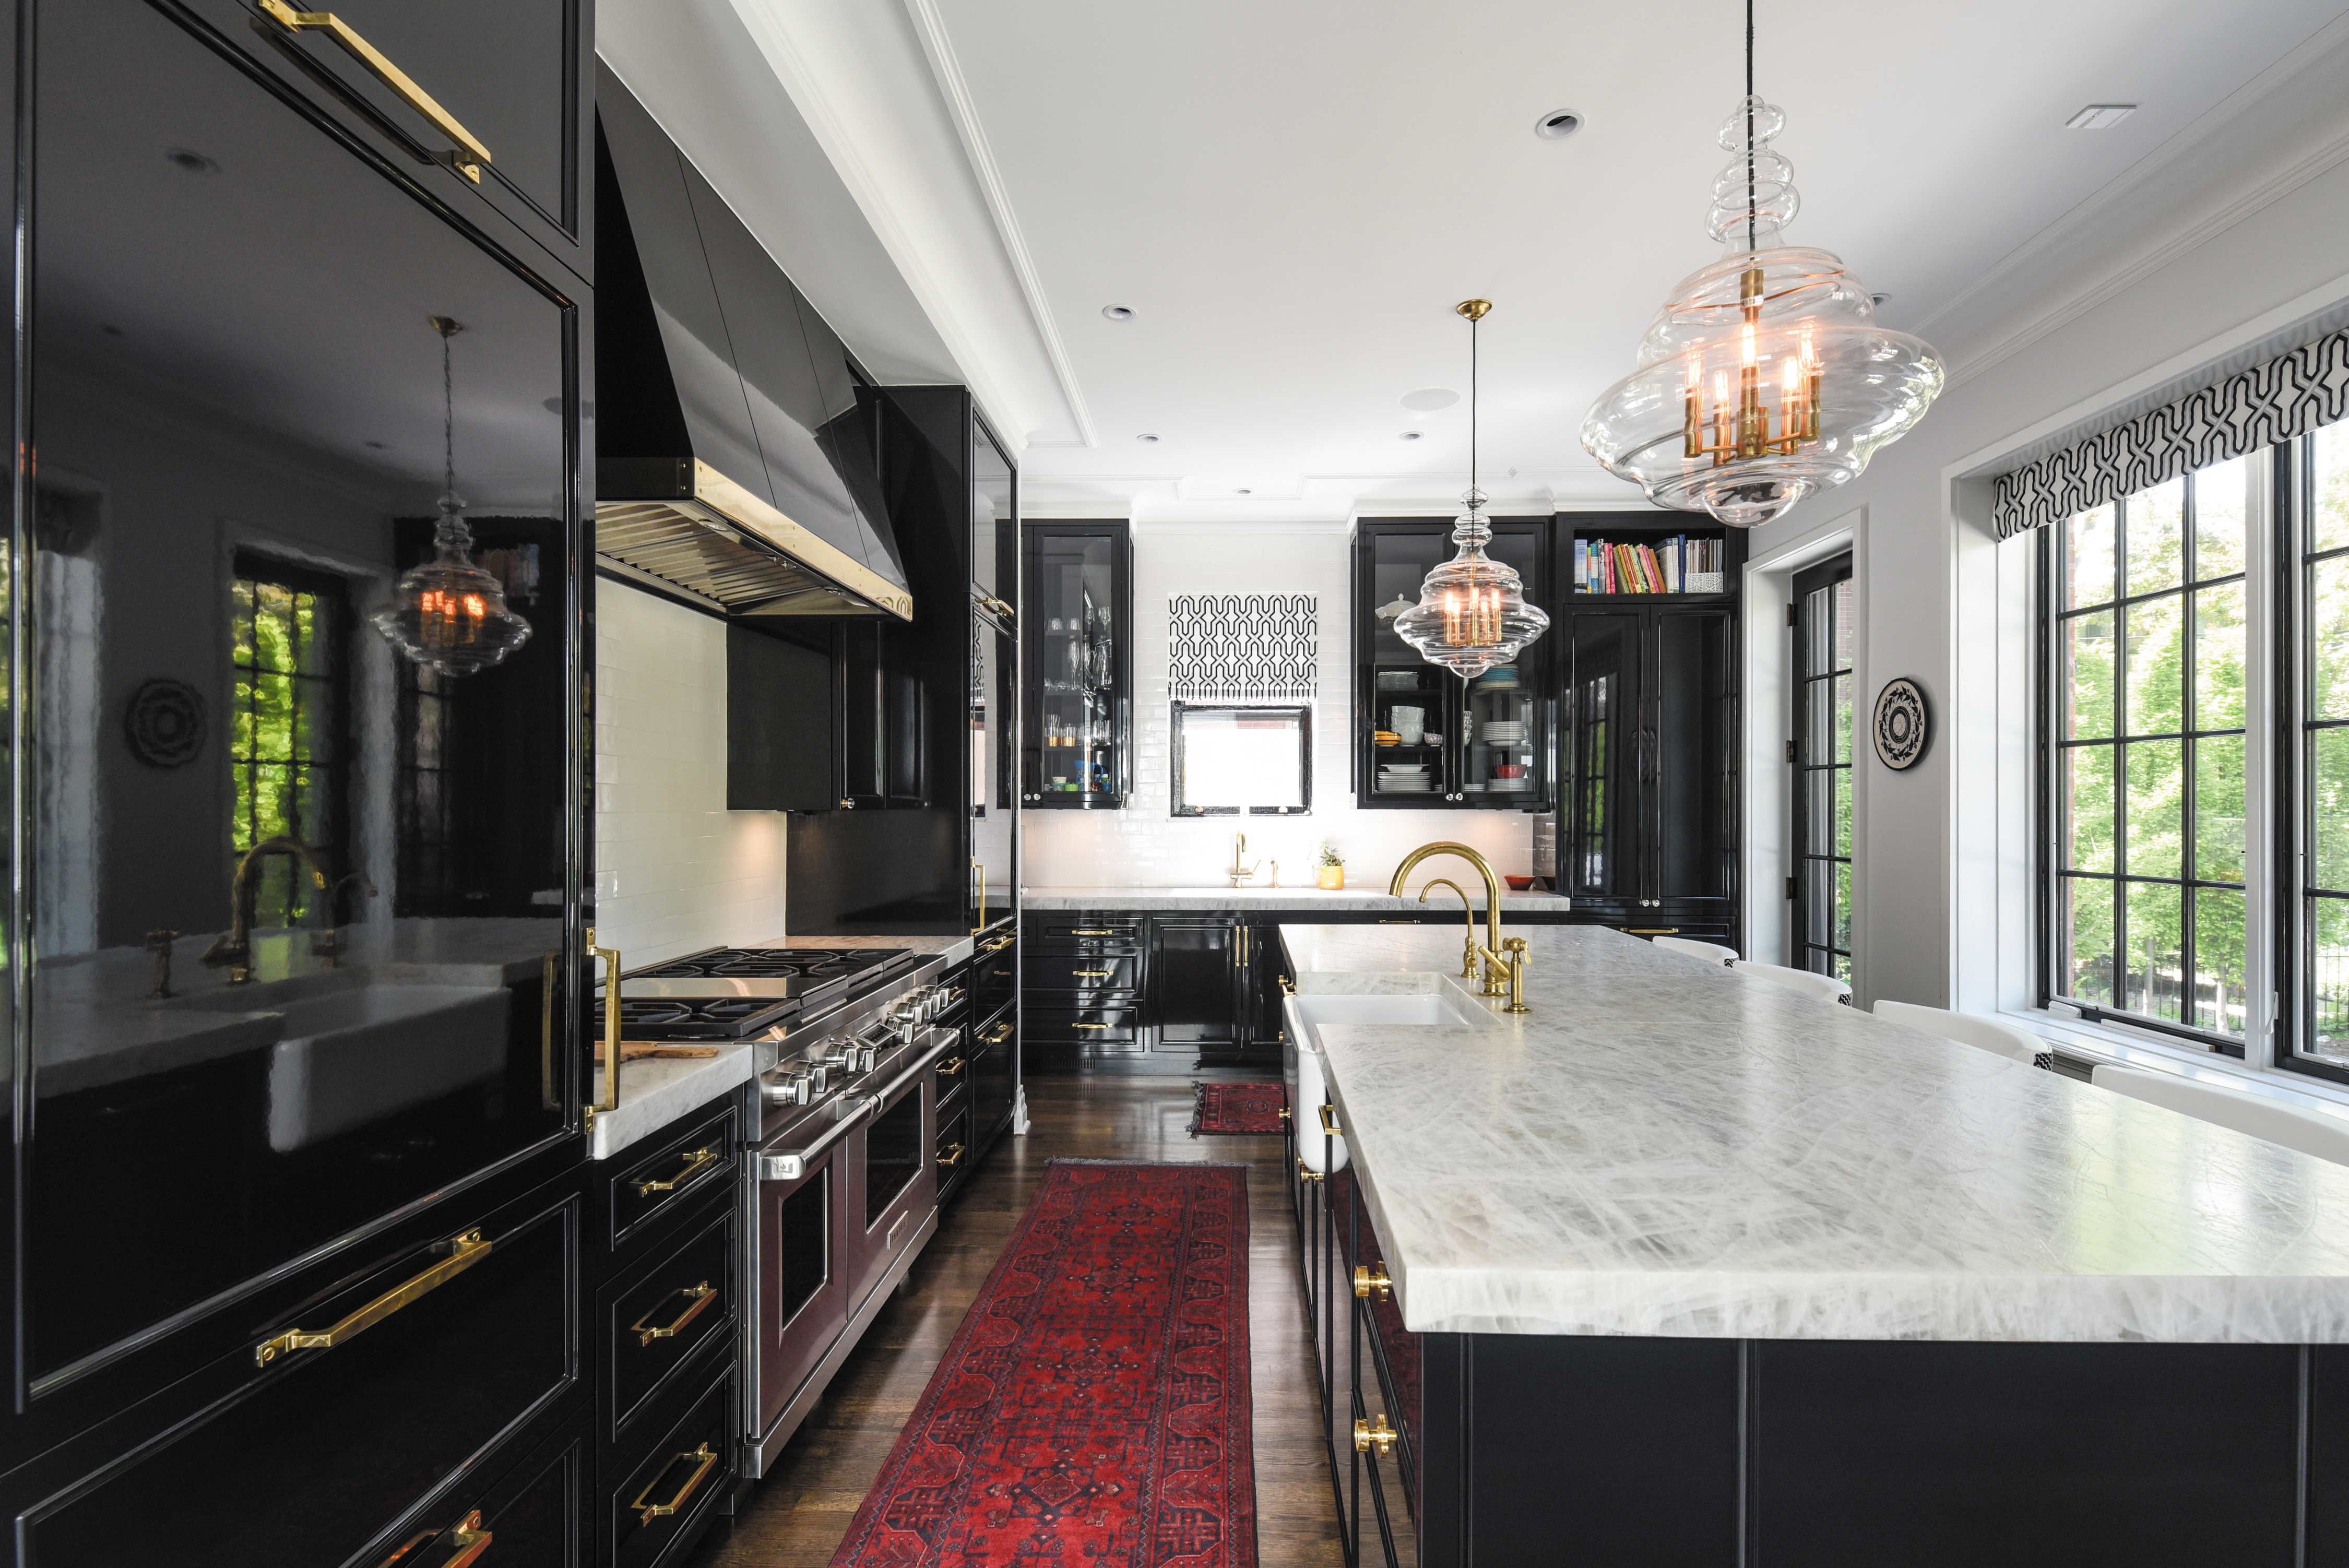 An elegant kitchen brings together Shaker-style, high-gloss painted cabinetry and paneled appliances, combined with brass trim details.